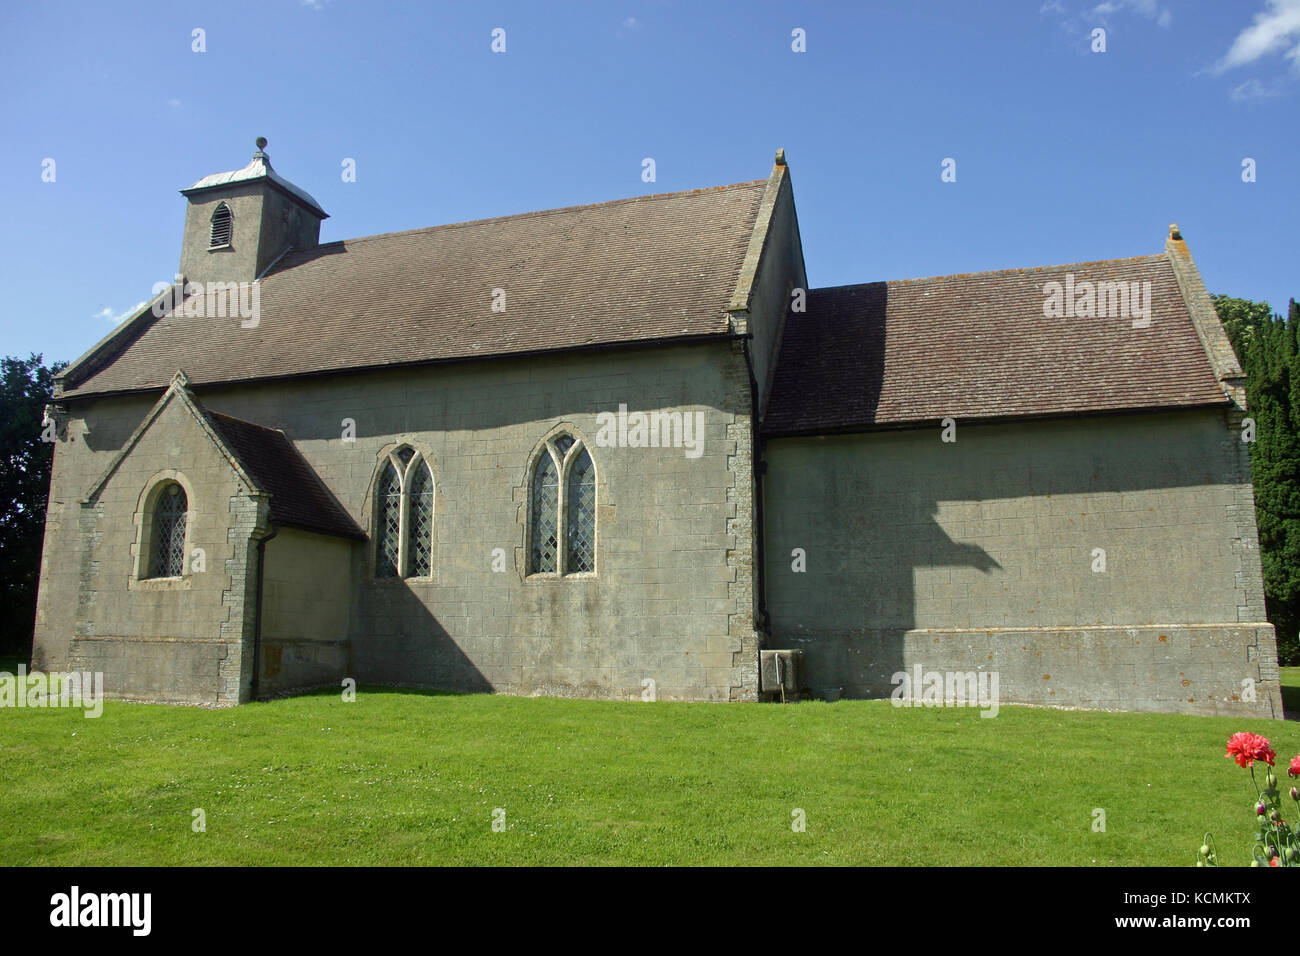 King Charles the Martyr church in Shelland, Suffolk. Viewed from the south. Mown grass in the foreground. Trees and blue sky with white cloud in the b Stock Photo